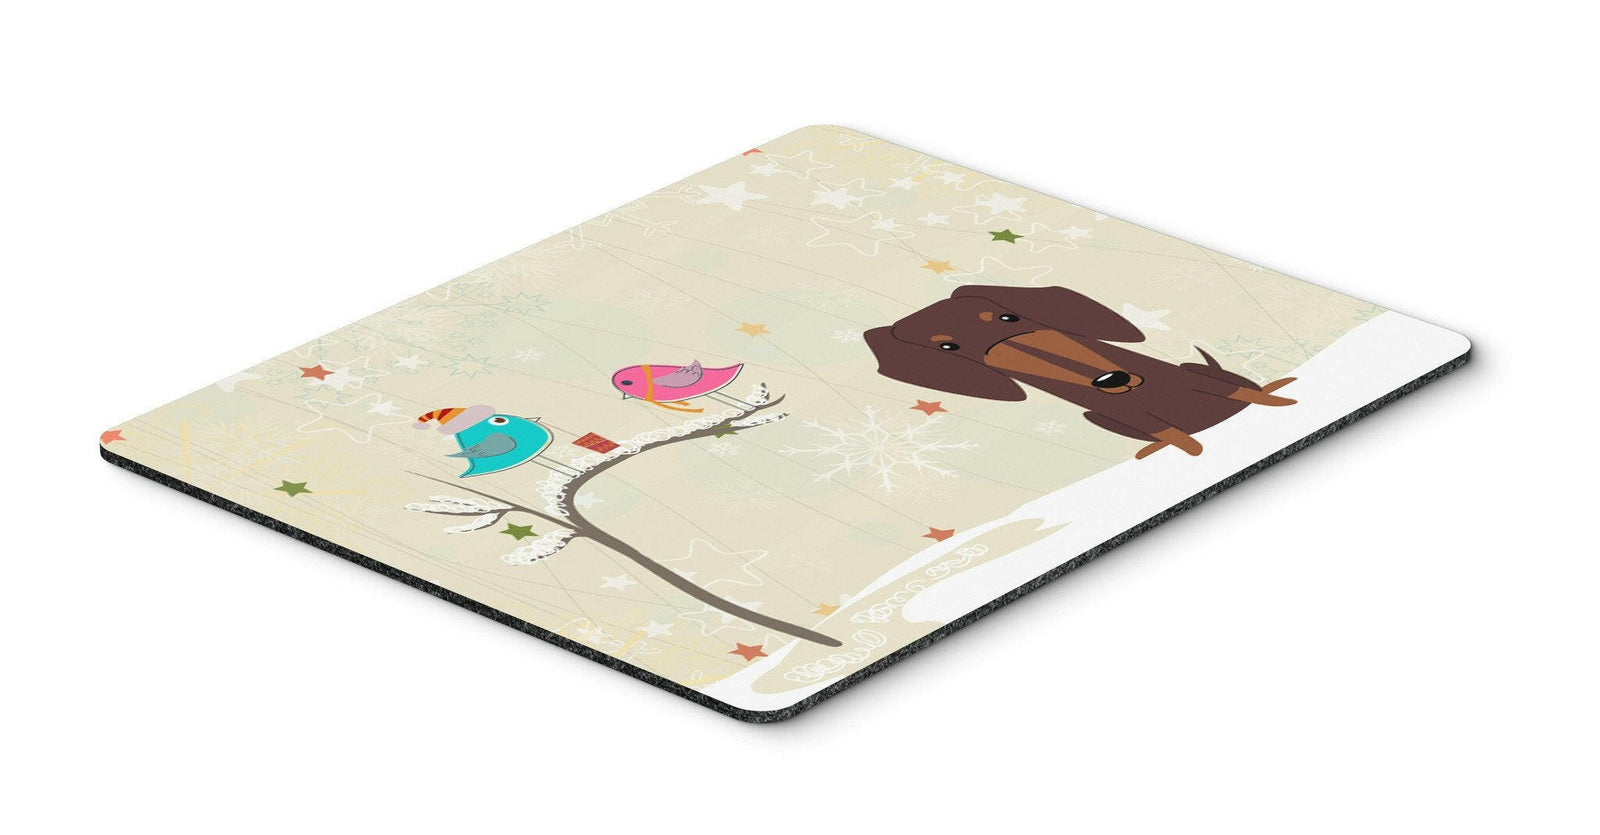 Christmas Presents between Friends Dachshund Chocolate Mouse Pad, Hot Pad or Trivet BB2603MP by Caroline's Treasures